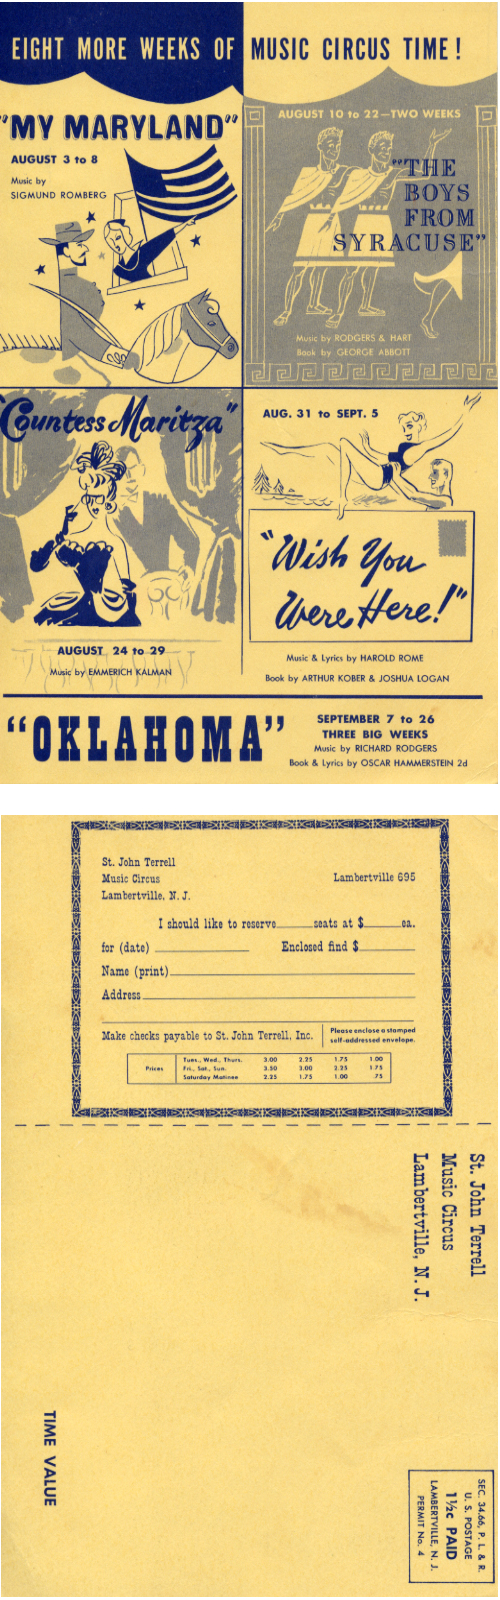 Postcard Flier for the last five shows of the 1954 Season